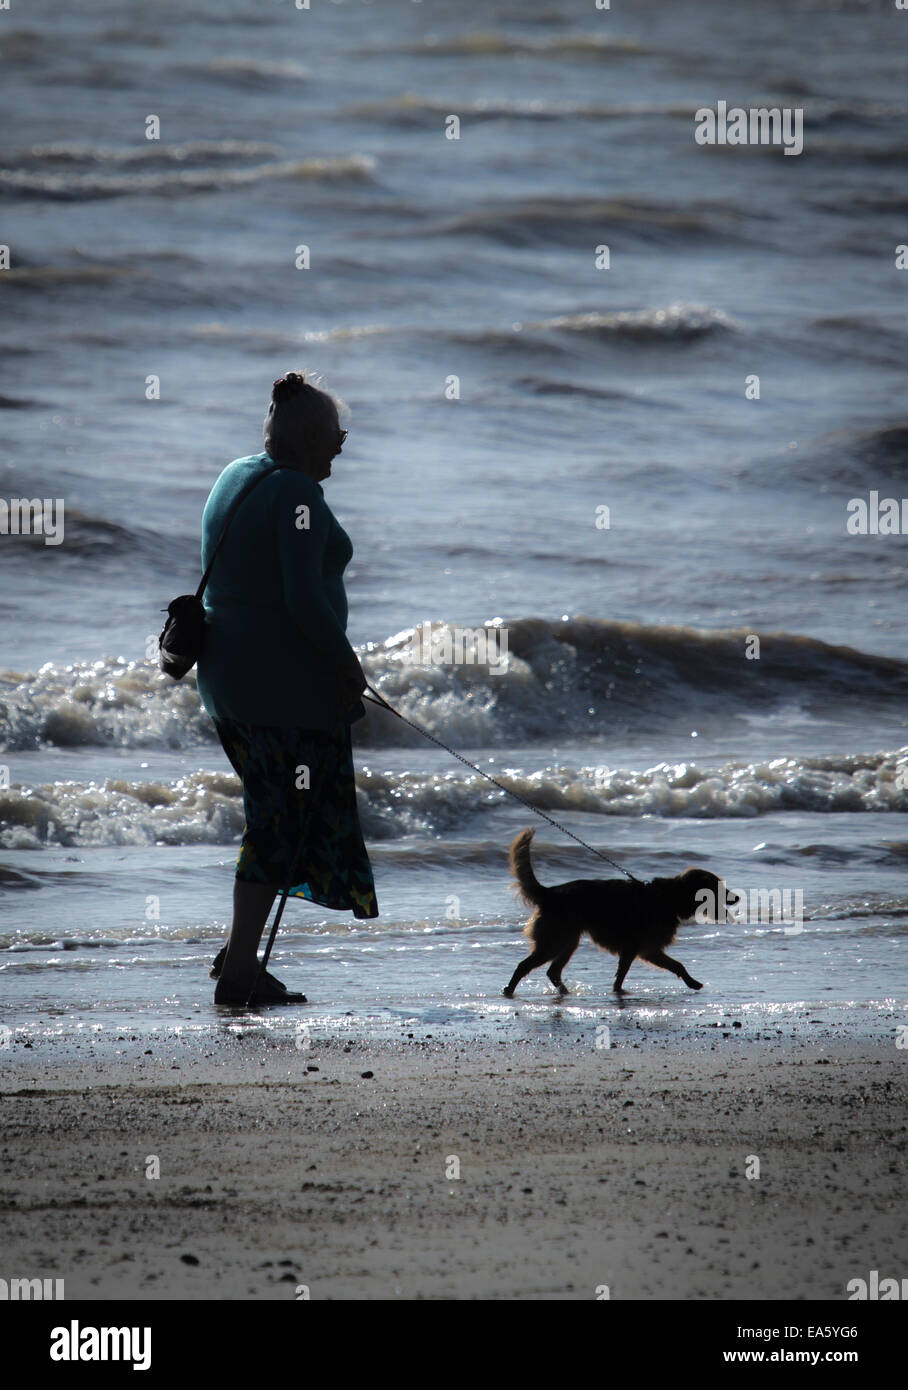 A silhouette of an elderly lady walking her dog along the beach at Littlehampton, West Sussex. Stock Photo